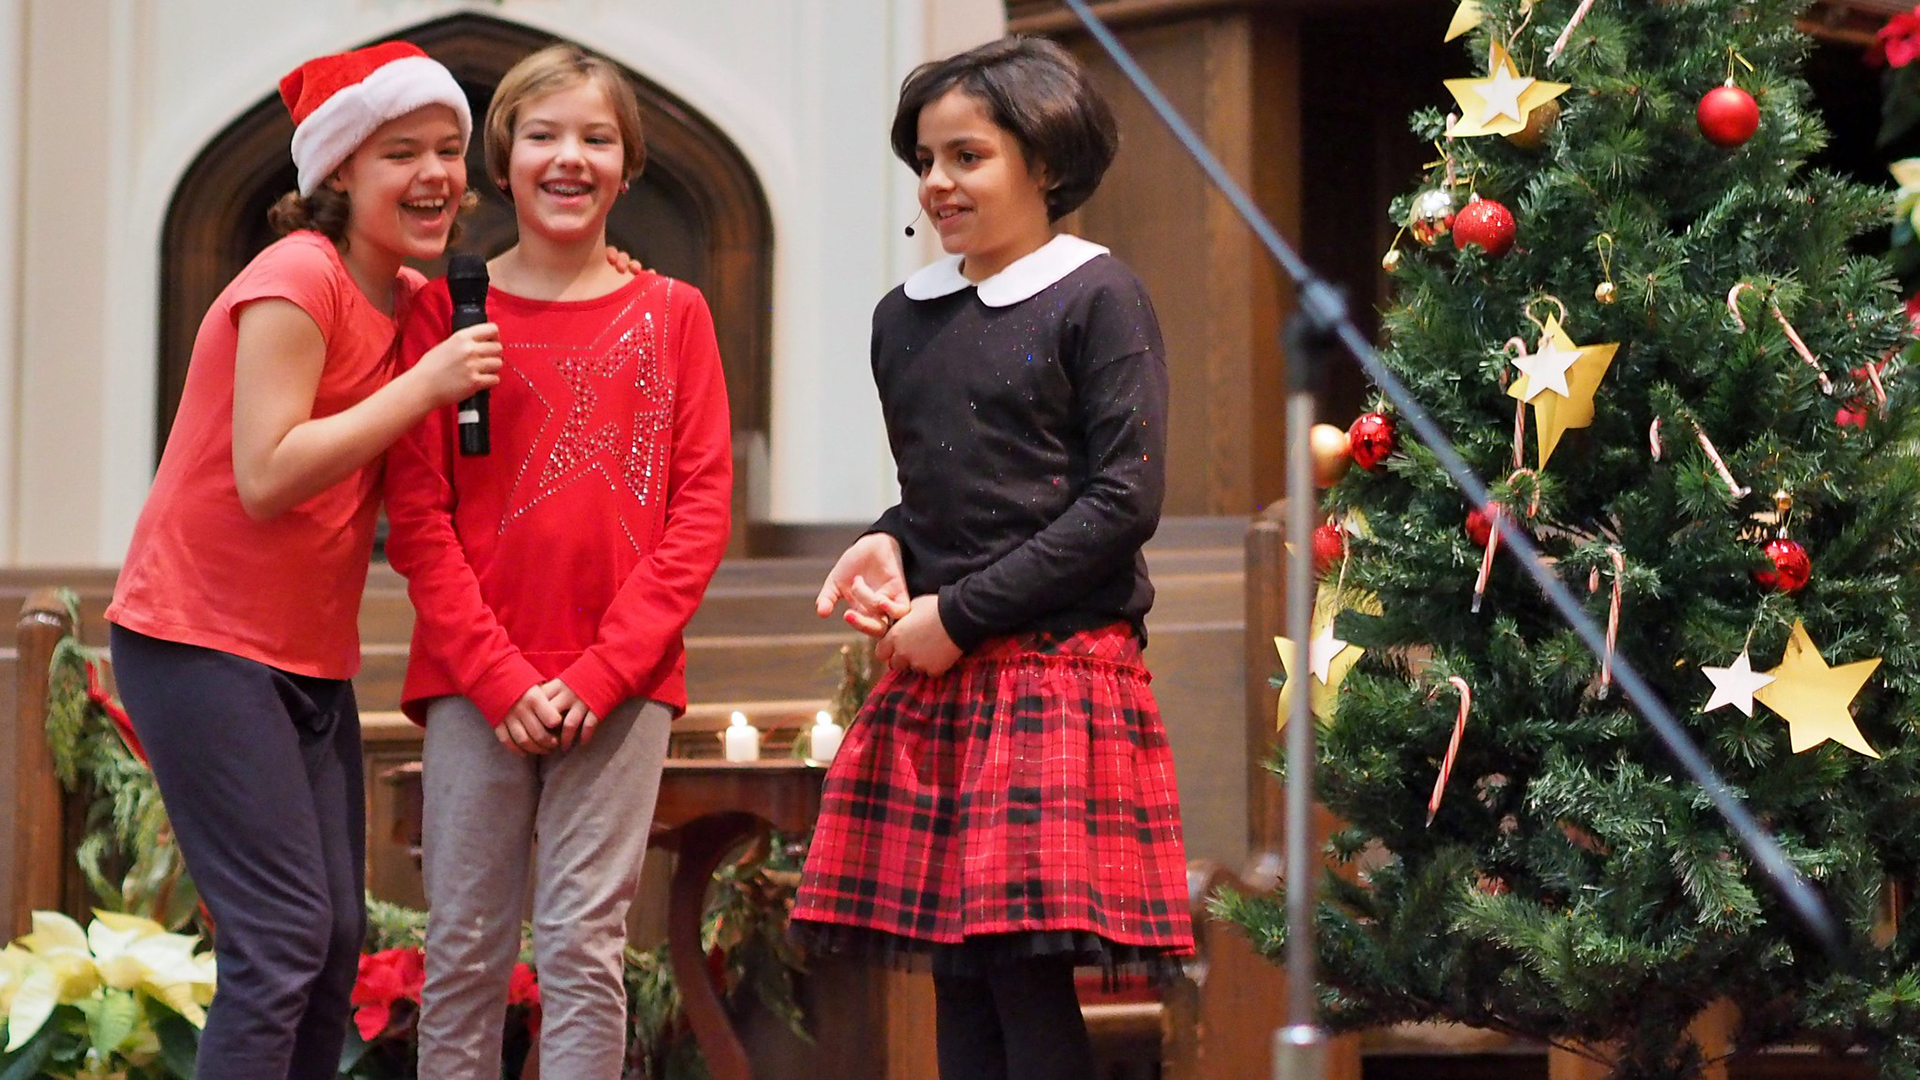 Christmas Eve with a Special Presentation from our Foundry Kids